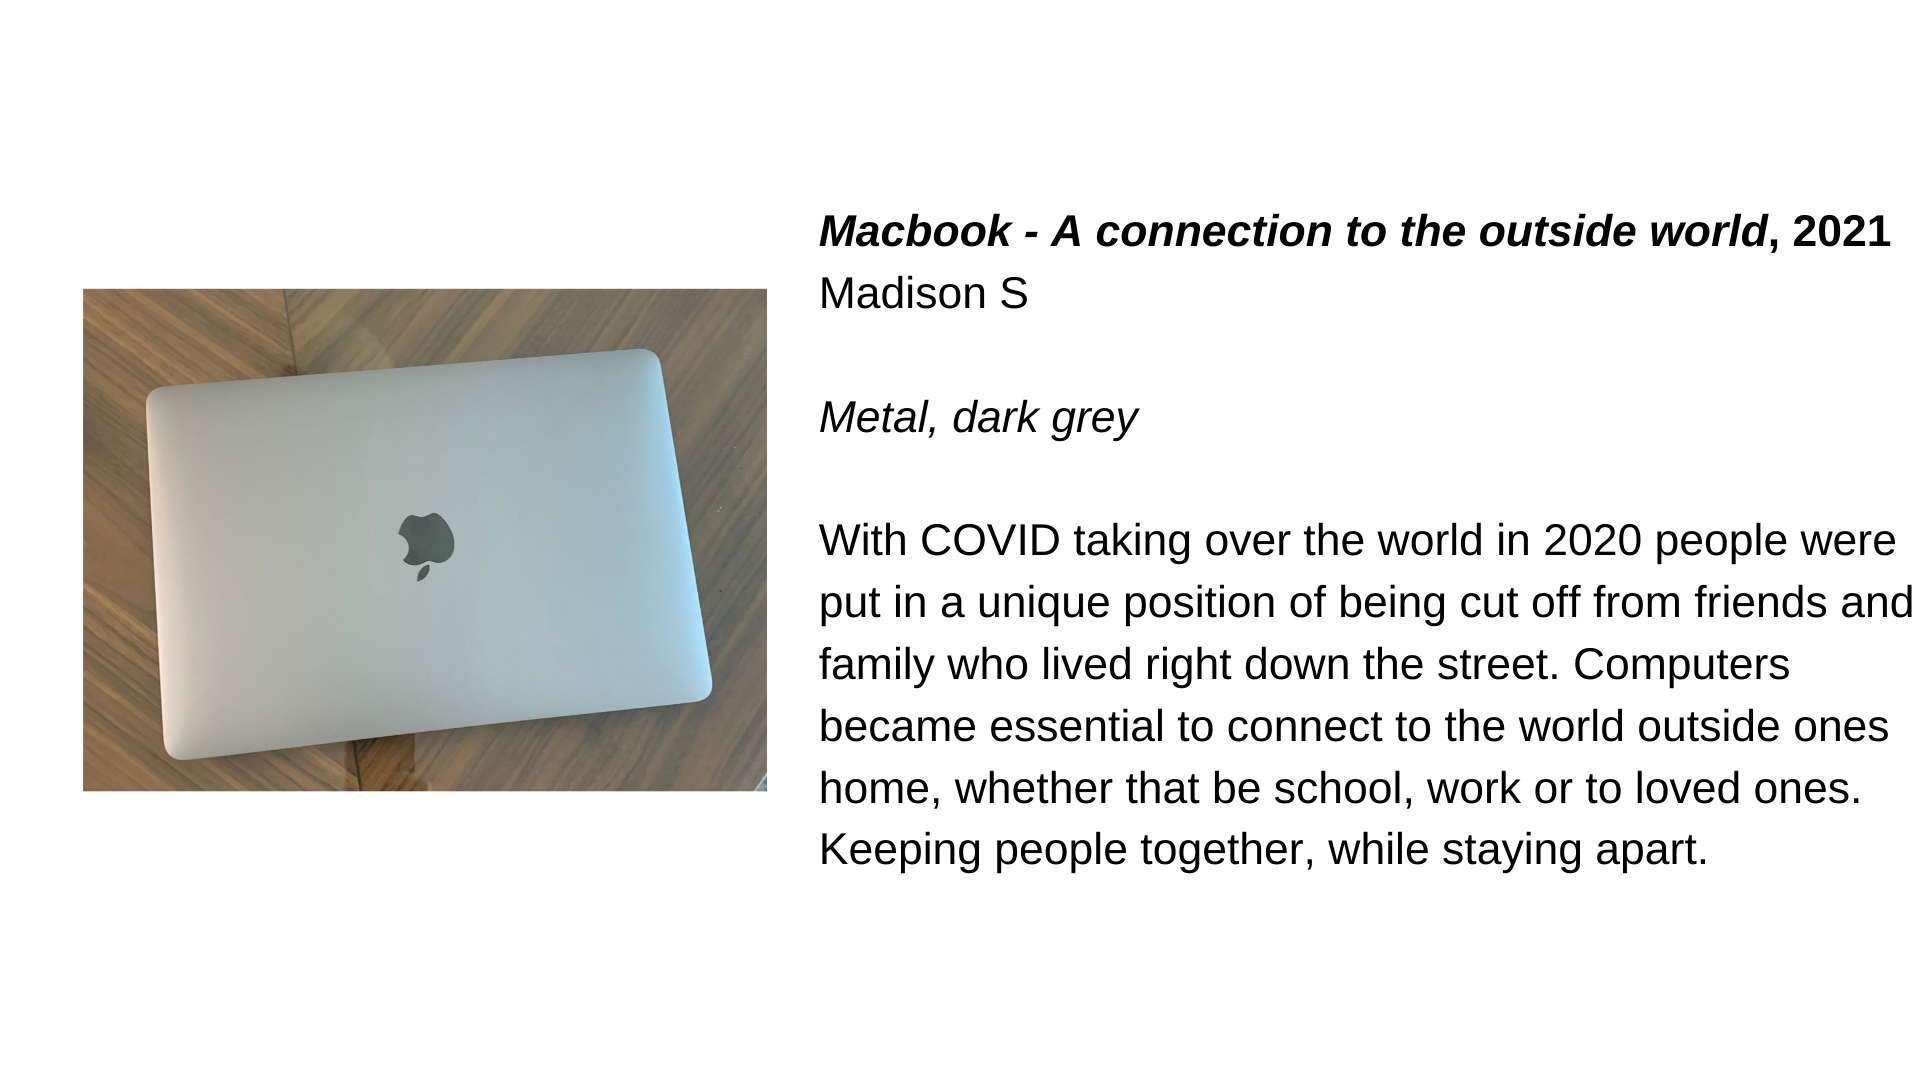  A shut MacBook from above next to the text, “Macbook - A connection to the outside world, 2021 - Madison S. Metal, dark grey. With COVID taking over the world in 2020 people were put in a unique position of being cut off from friends and family who 